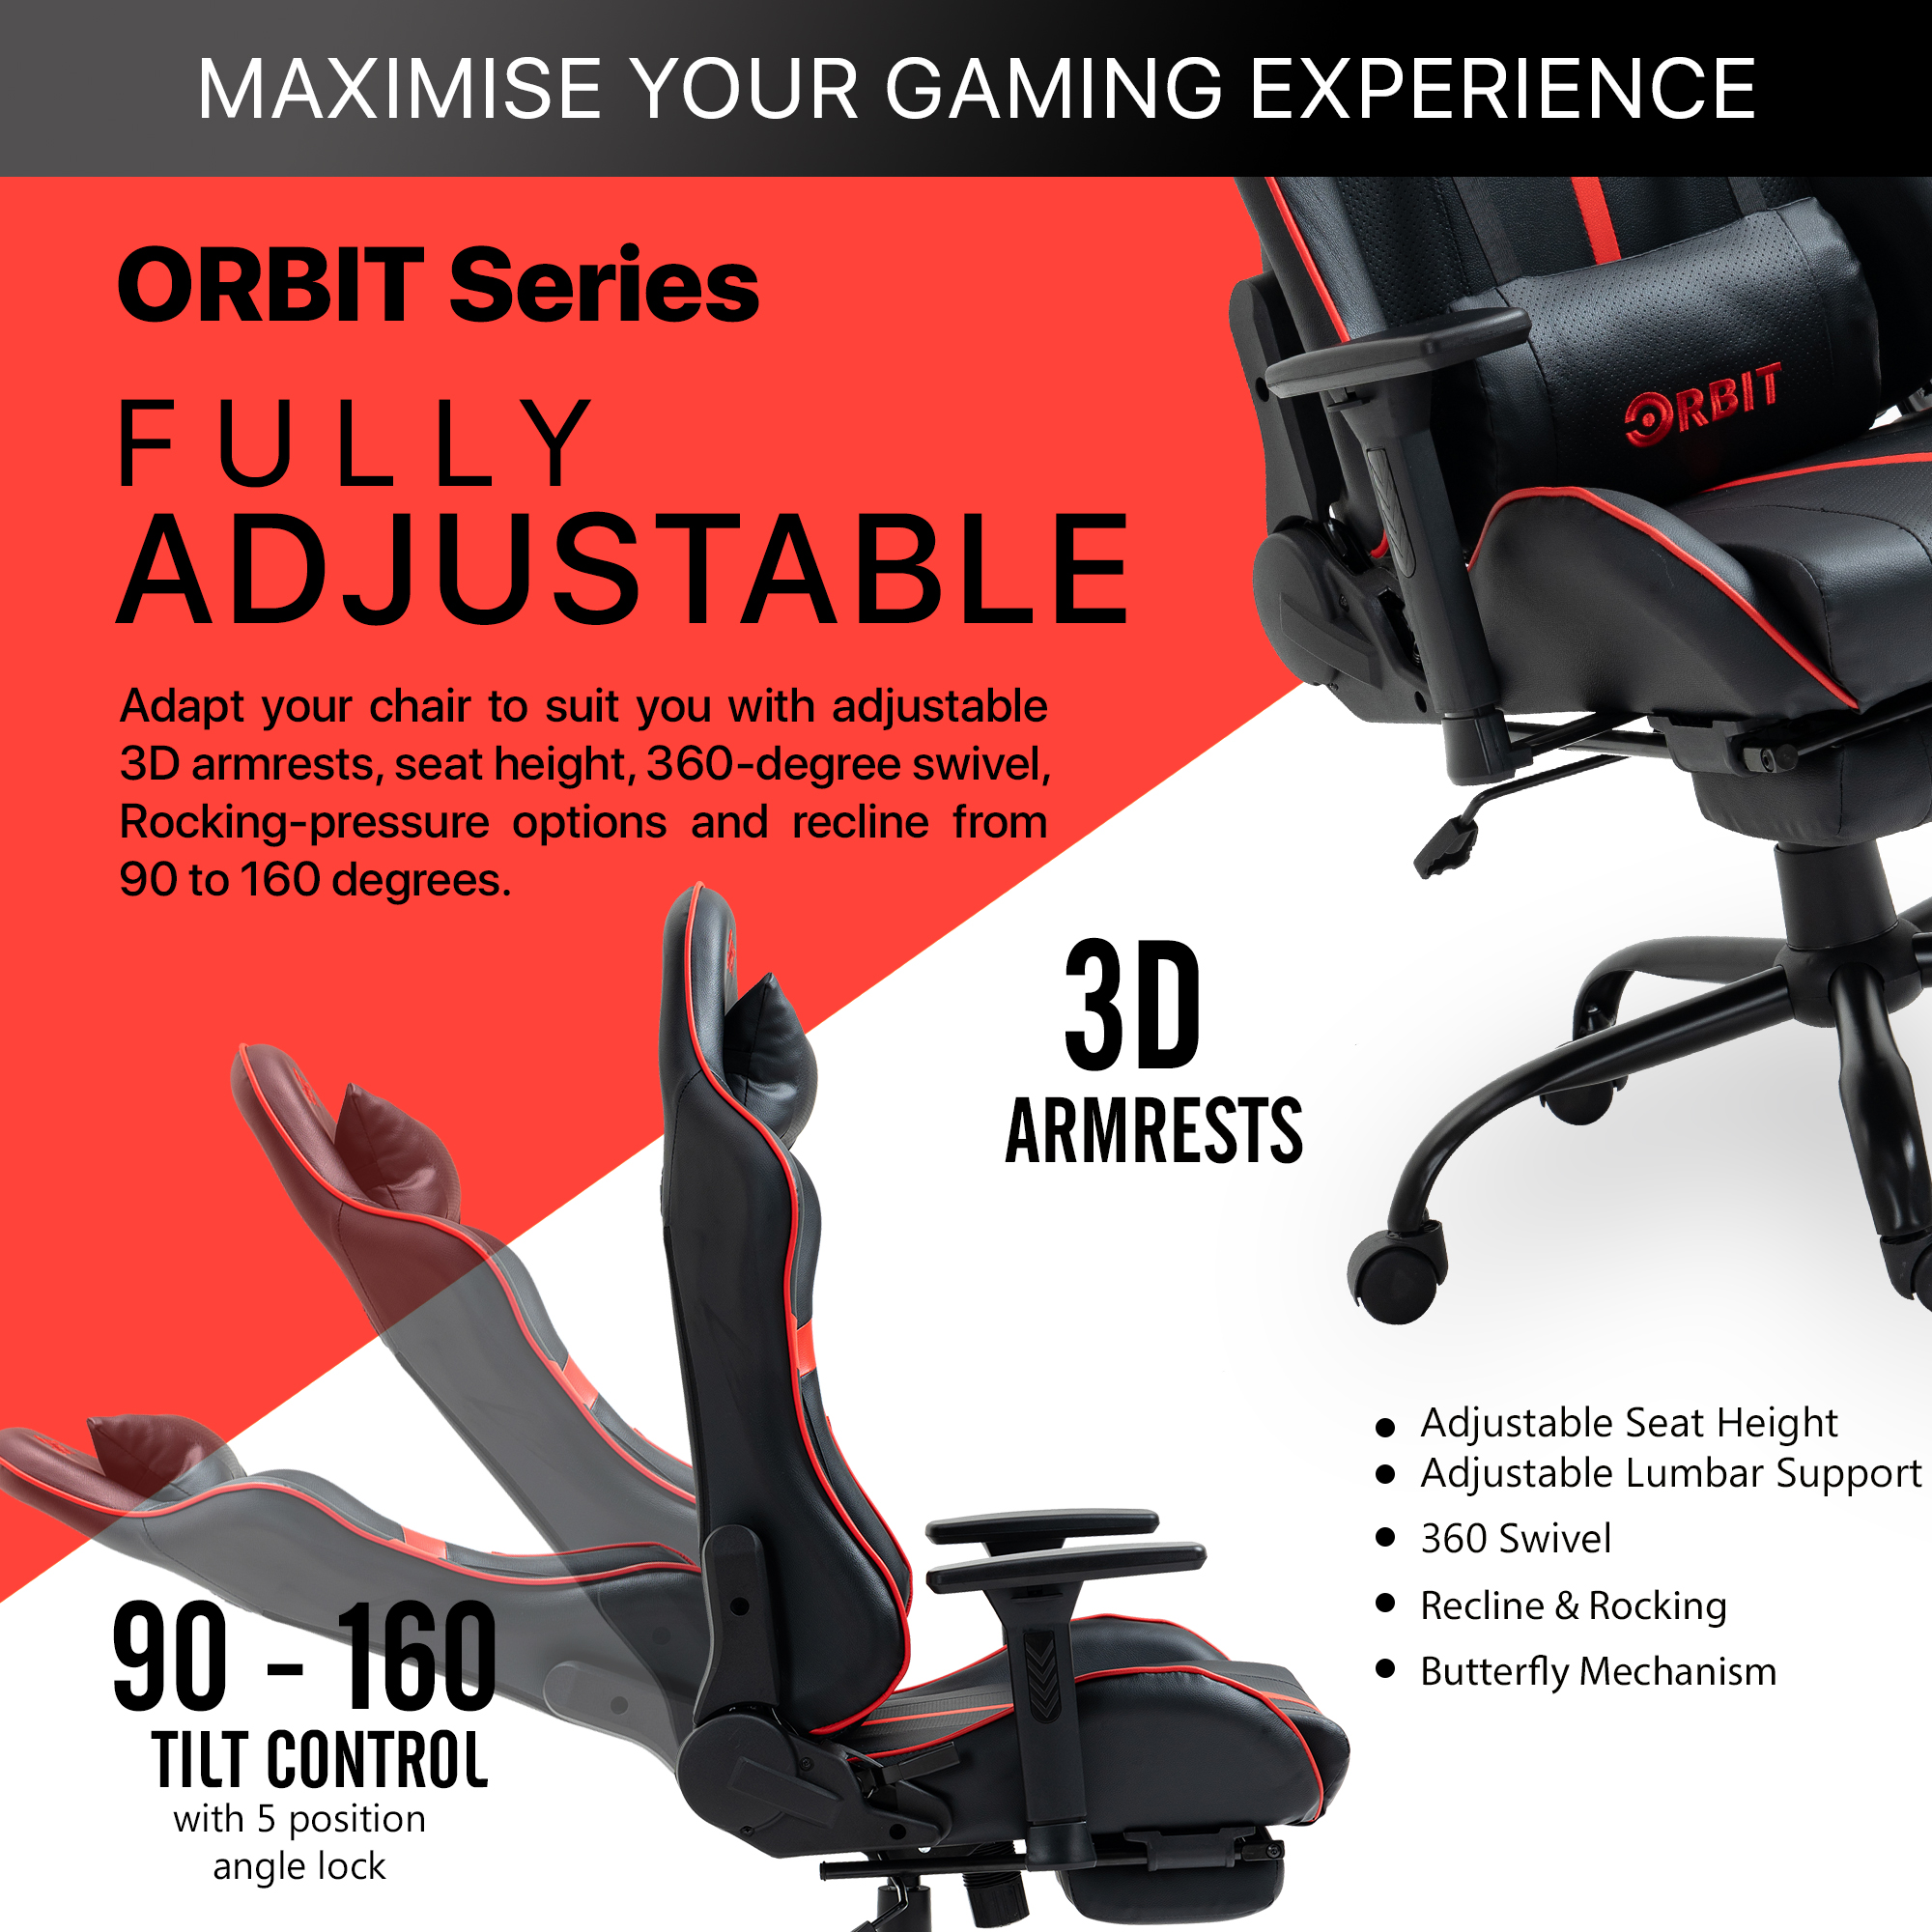 The backrest can be positioned at any angle from 90-160 degree reclining for work, gaming, studying